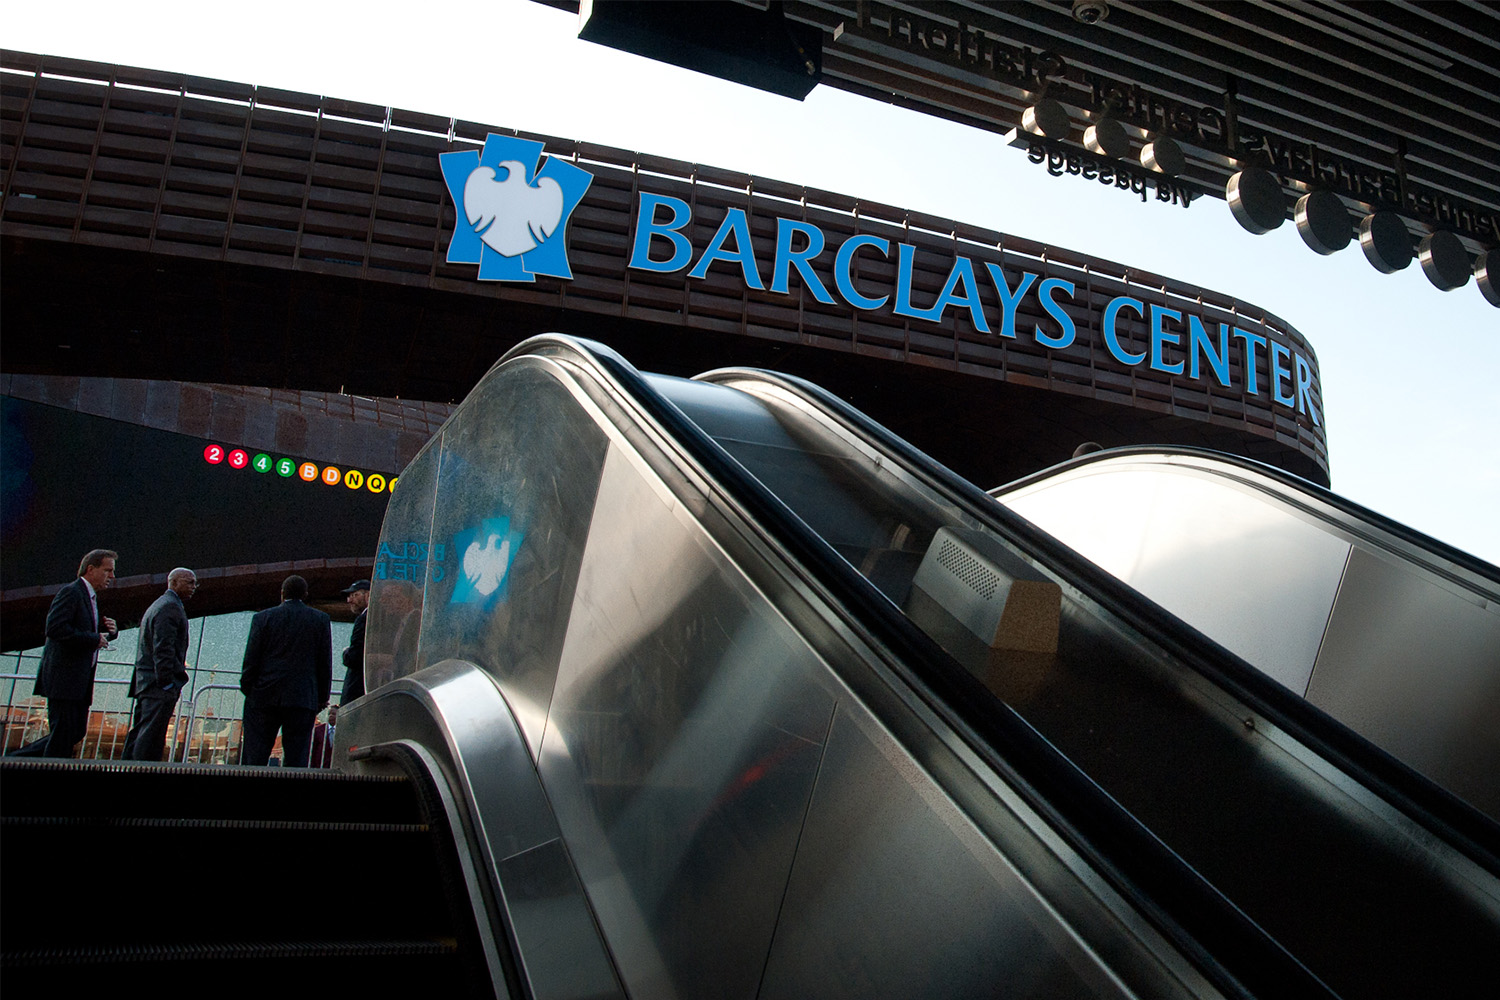 The Barclays Center, seen from the bottom of an escalator 